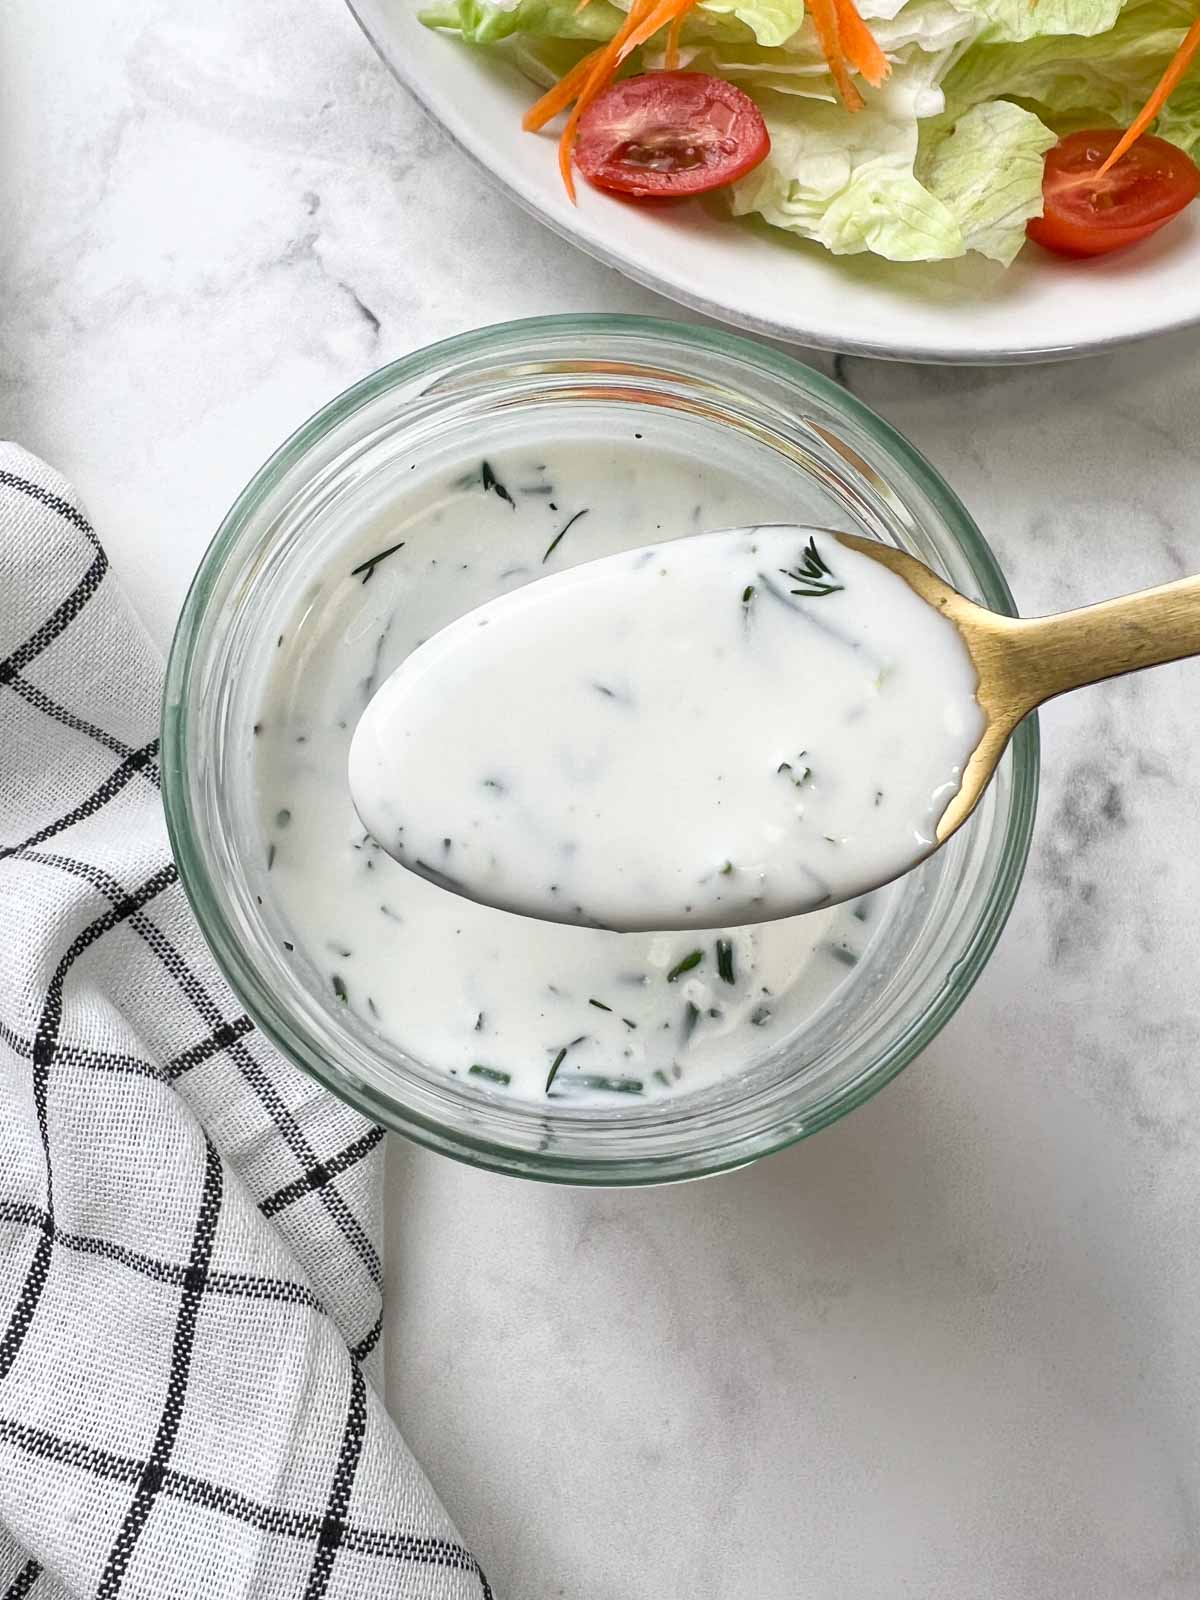 ranch dressing in a spoon with salad plate on the side